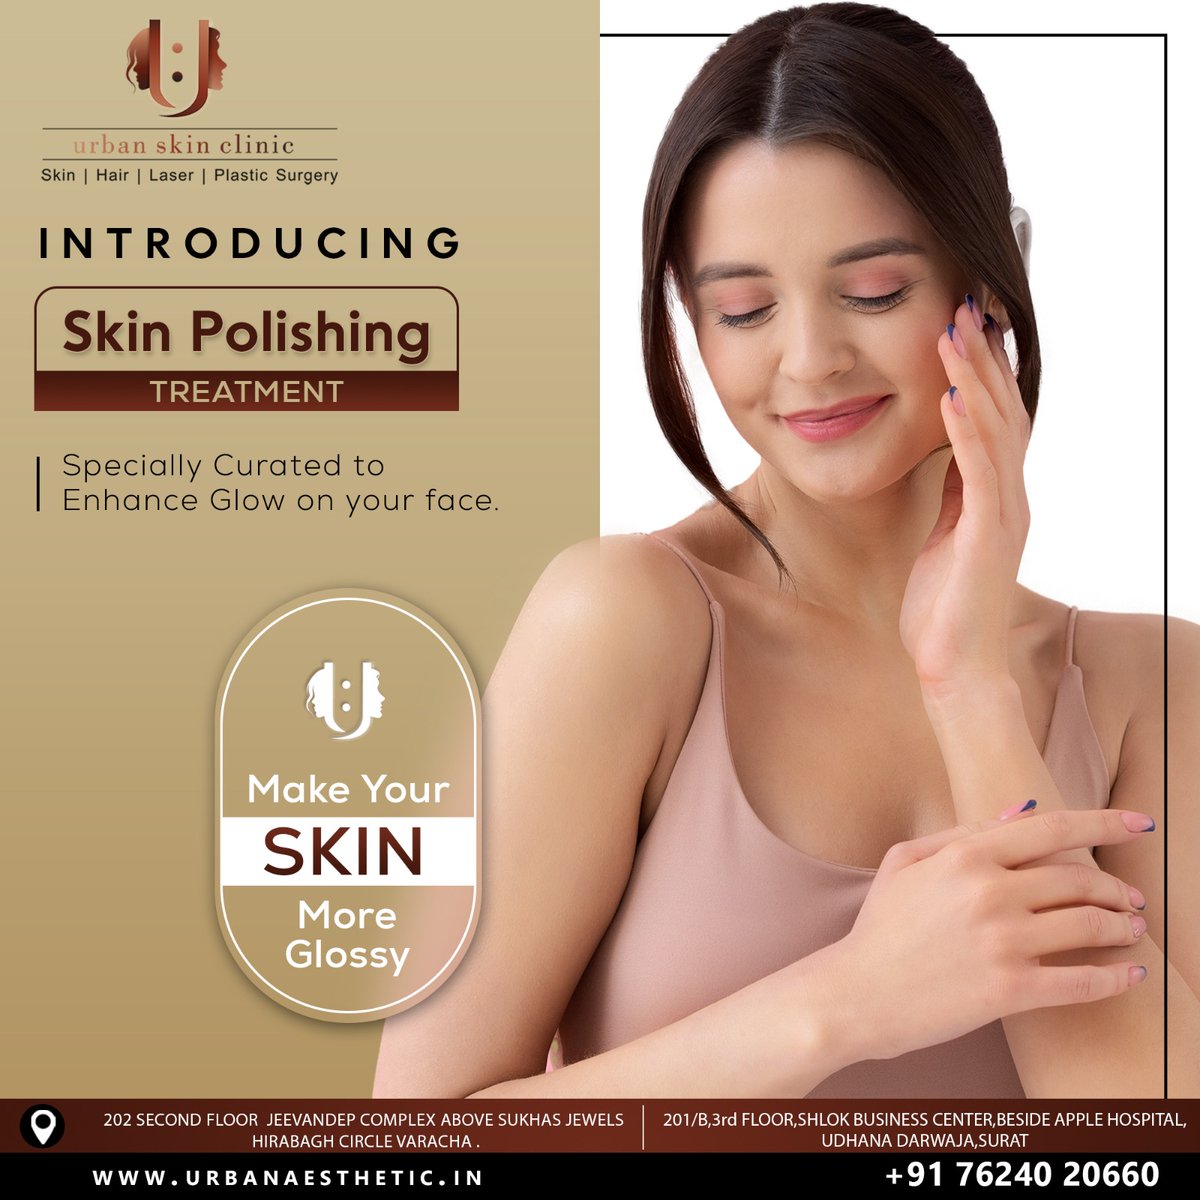 Skin Glow Treatment, Skin Polishing, Face Makeover, Best Skin Specialist in Udhna, Piplod, Surat

#skinpolishing #skinglow #skinfairness #faceglow #skinwhitening  #cosmetictreatment #skintreatment #facialtreatment #skin #skincare #lasertreatment #plasticsurgery #cosmeticsurgery